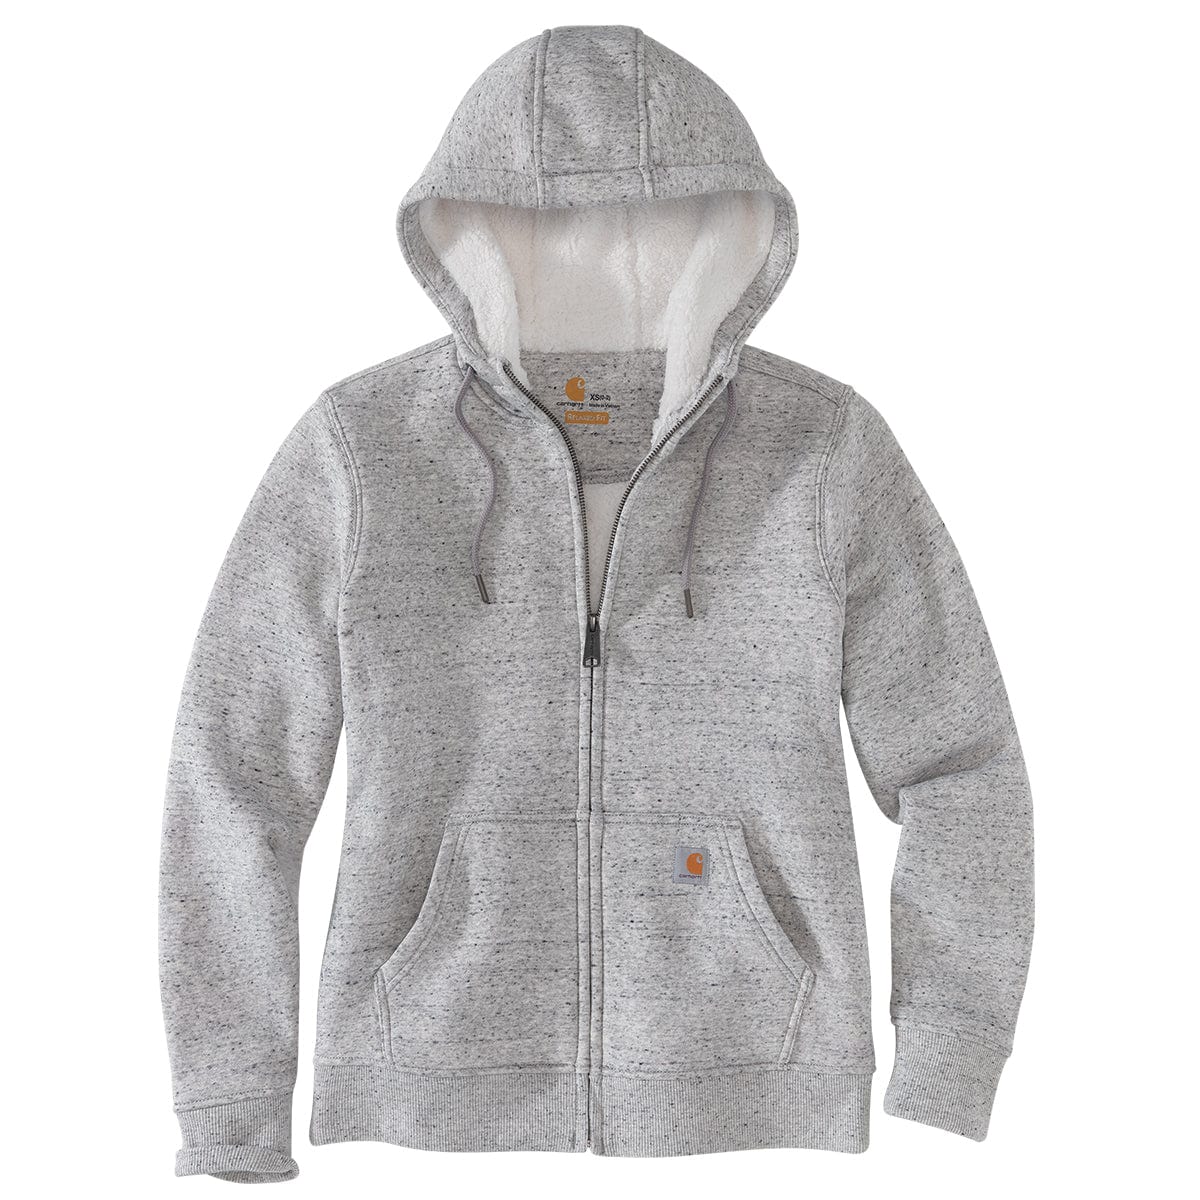 Carhartt Midweight Thermal-Lined Full-Zip Sweatshirt, Product